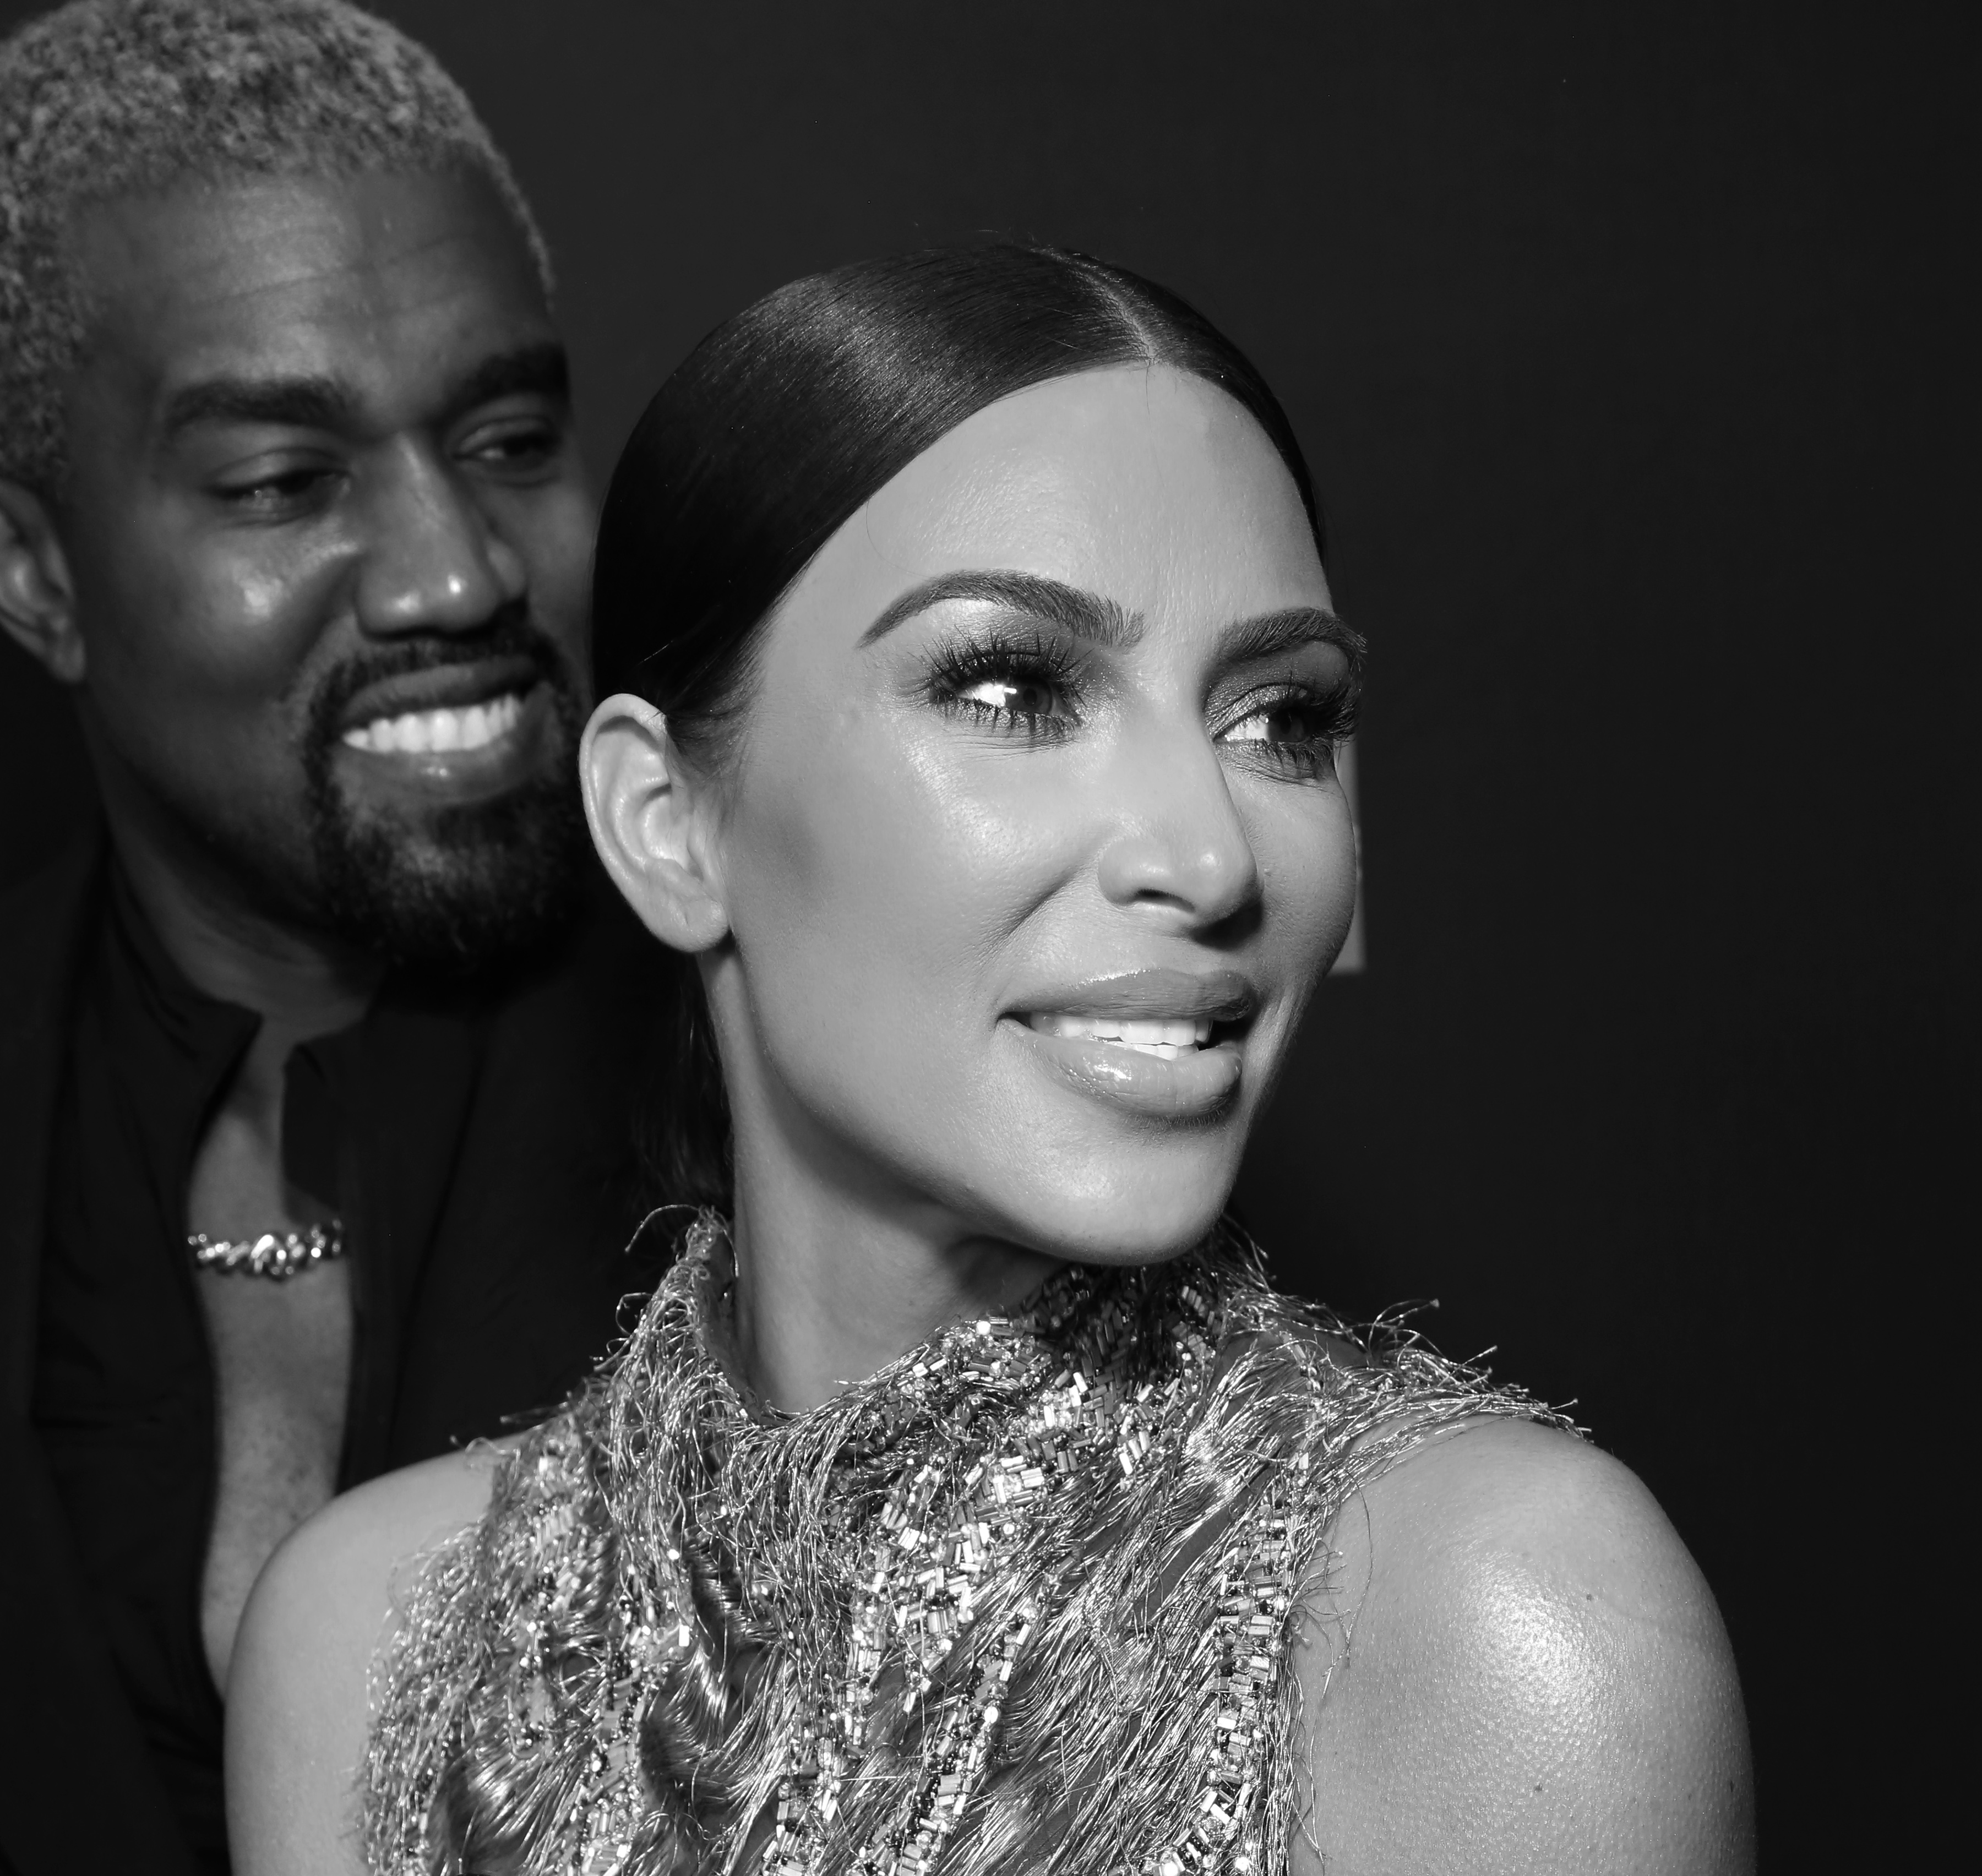 Kanye West and Kim Kardashian are photographed at the opening night of 'The Cher Show' on Broadway